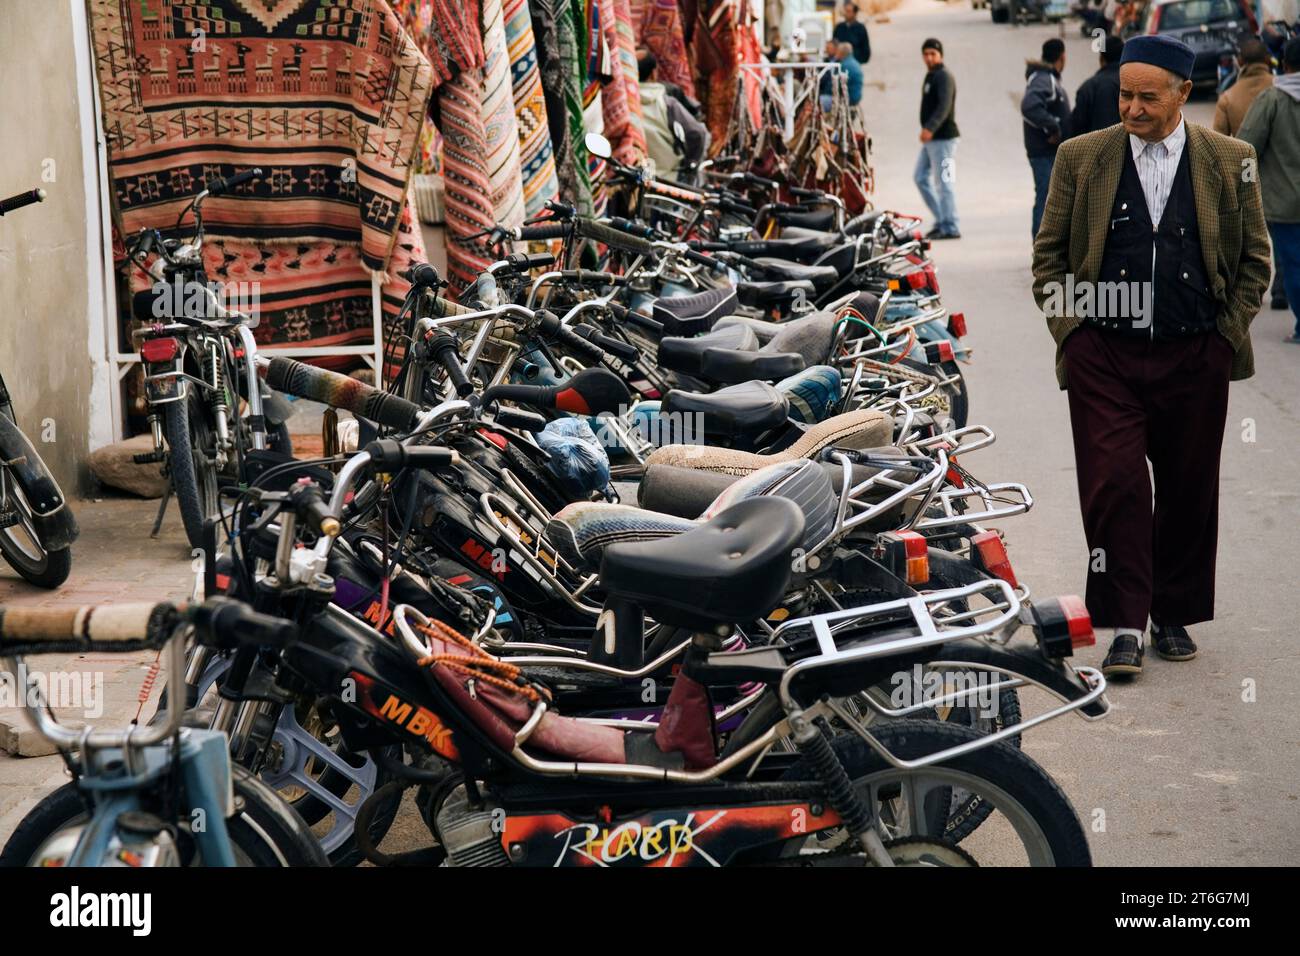 An old man wearing a fez walks past a row of motorcycles (mopeds). Stock Photo